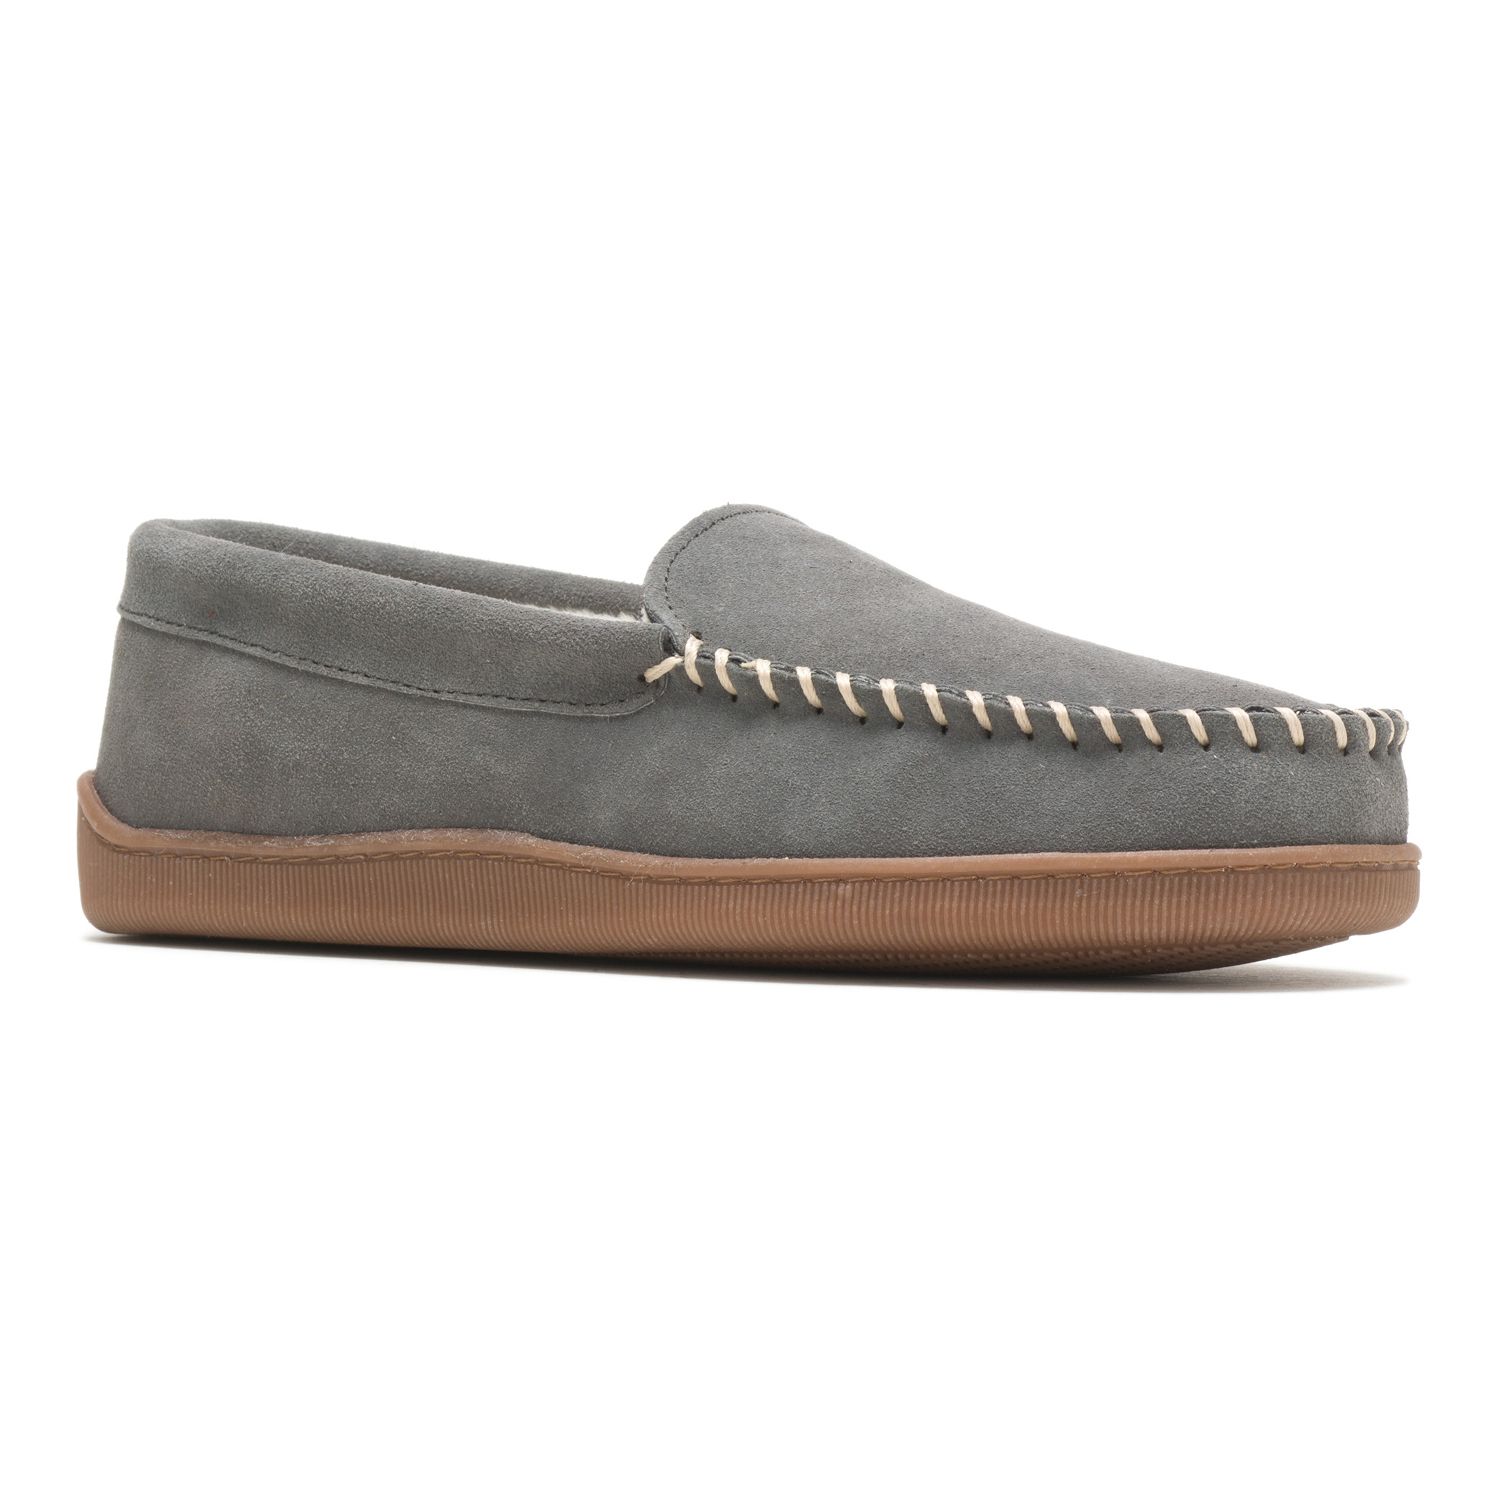 Image for Hush Puppies Dawson Men's Suede Slippers at Kohl's.